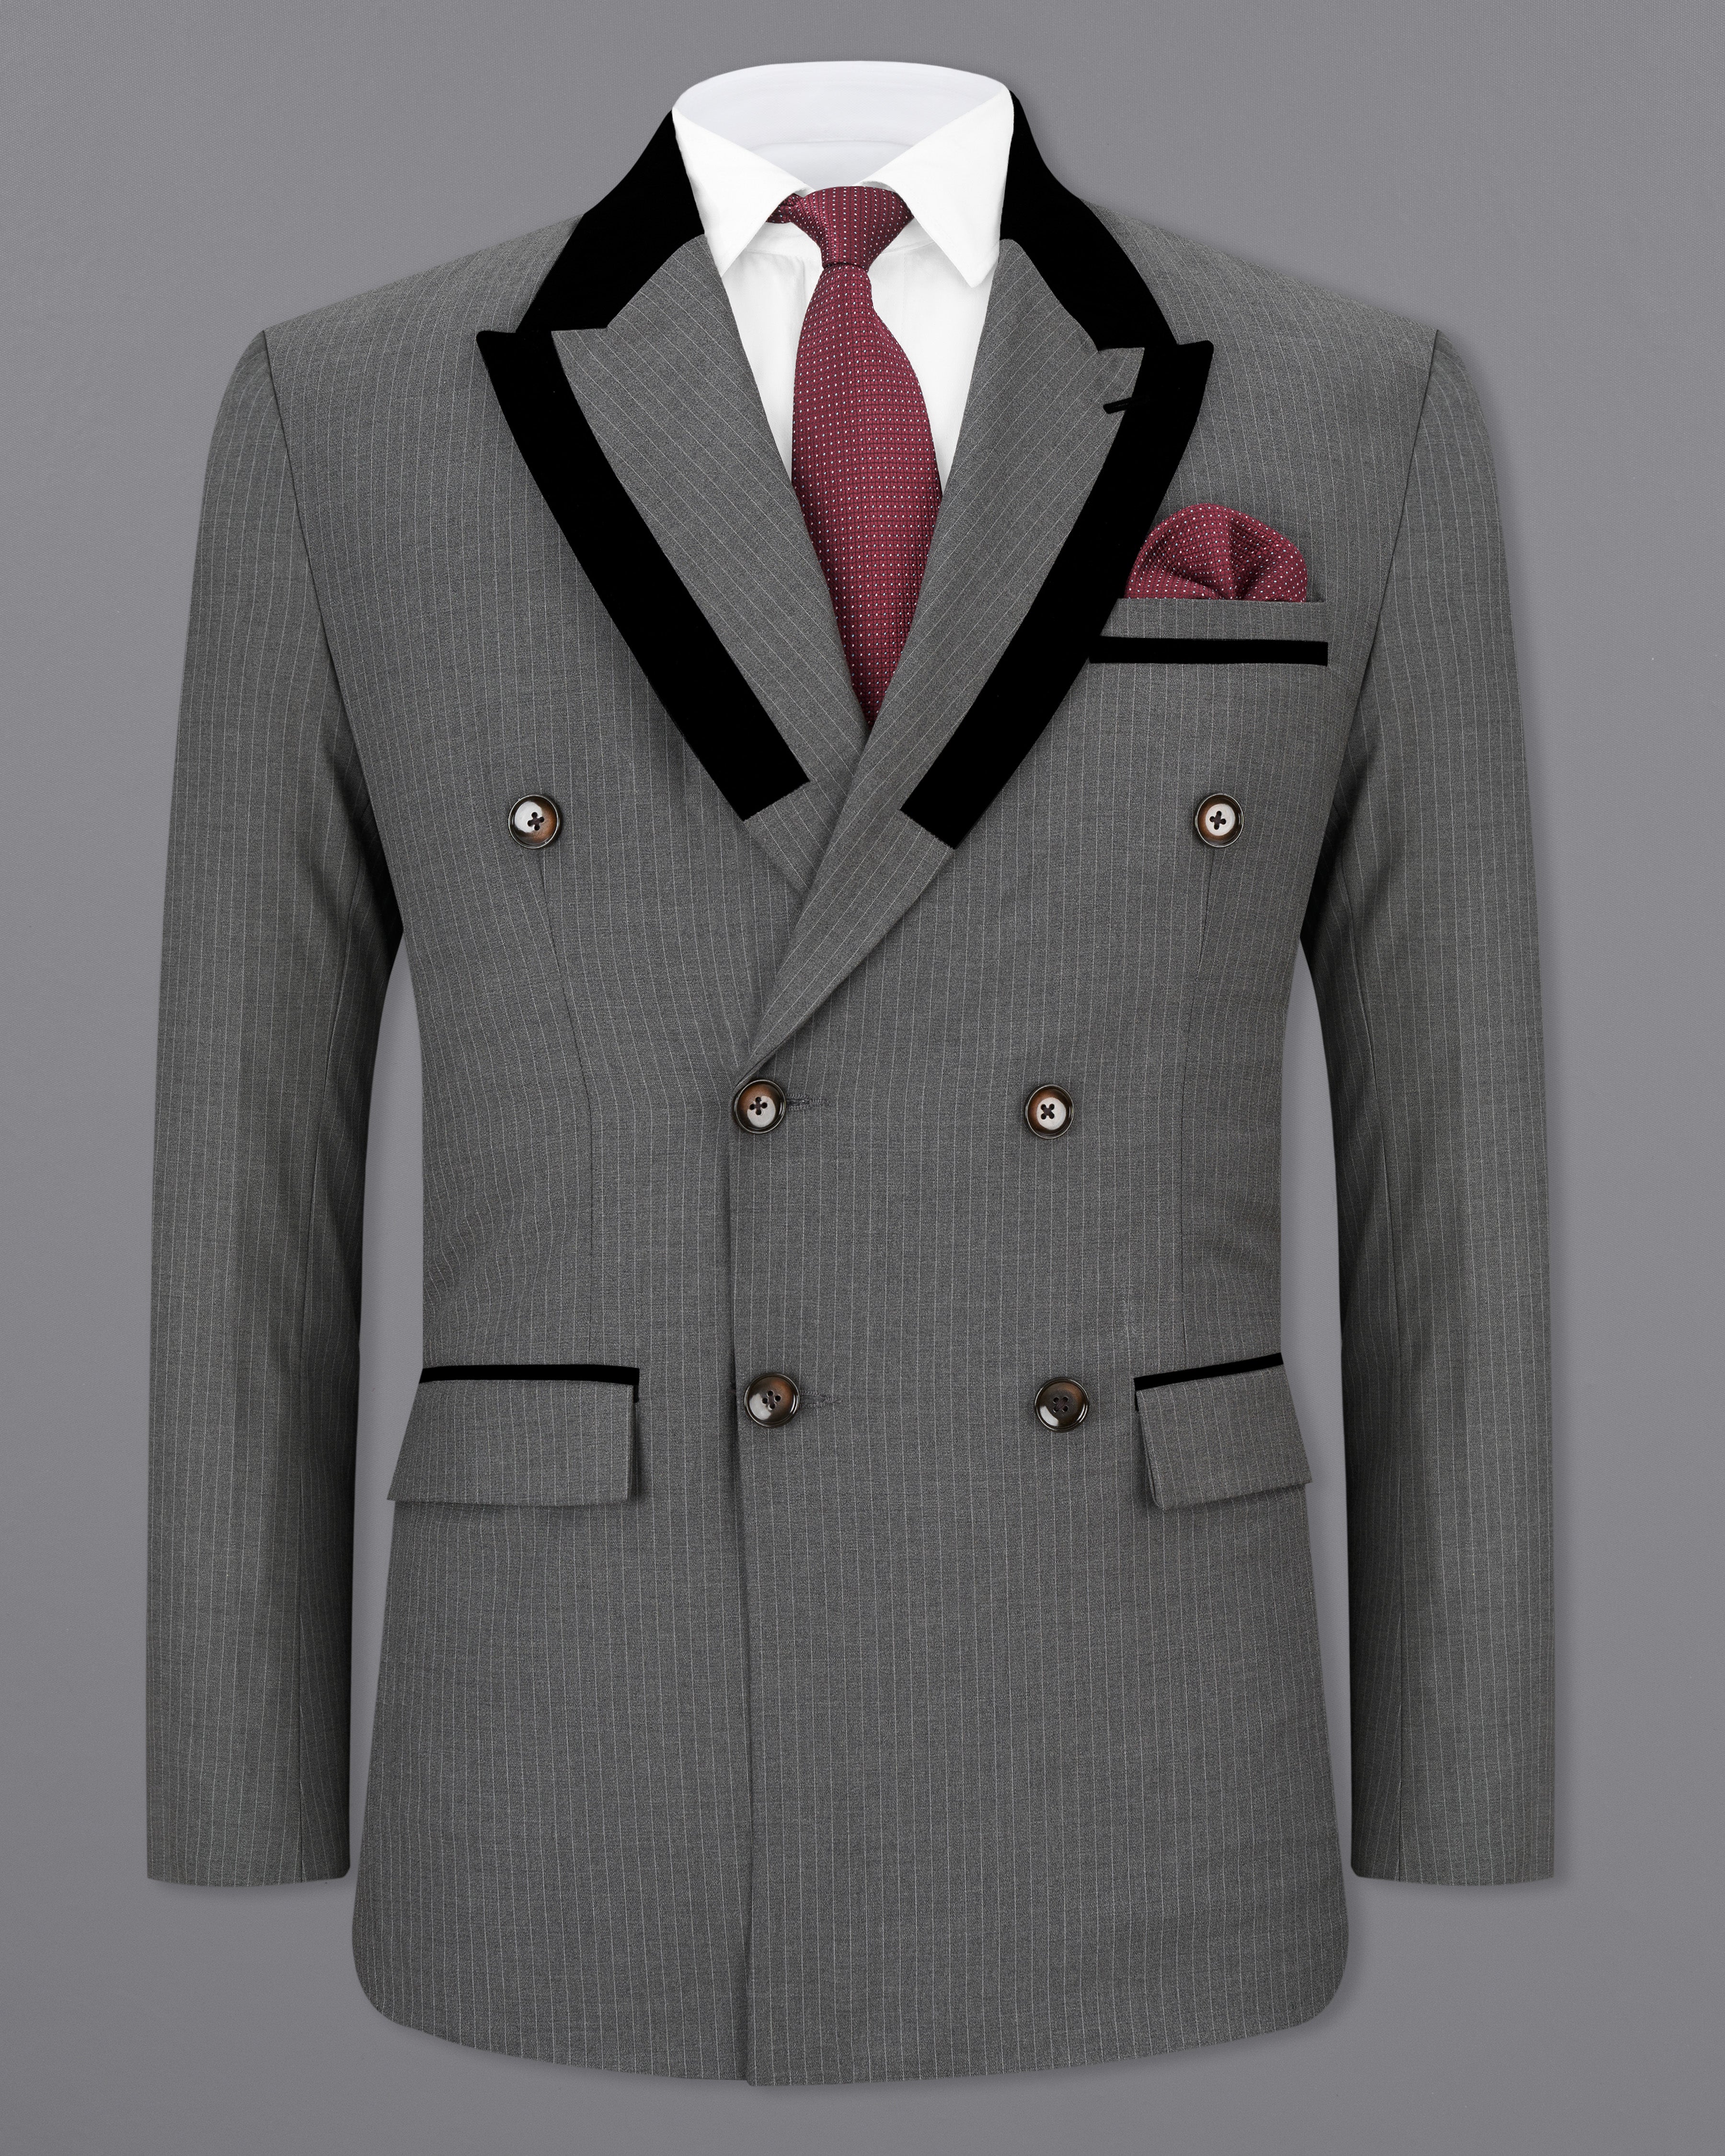 Ironside Gray Striped Double Breasted Designer Blazer BL2539-DB-D245-36, BL2539-DB-D245-38, BL2539-DB-D245-40, BL2539-DB-D245-42, BL2539-DB-D245-44, BL2539-DB-D245-46, BL2539-DB-D245-48, BL2539-DB-D245-50, BL2539-DB-D245-53, BL2539-DB-D245-54, BL2539-DB-D245-56, BL2539-DB-D245-58, BL2539-DB-D245-60